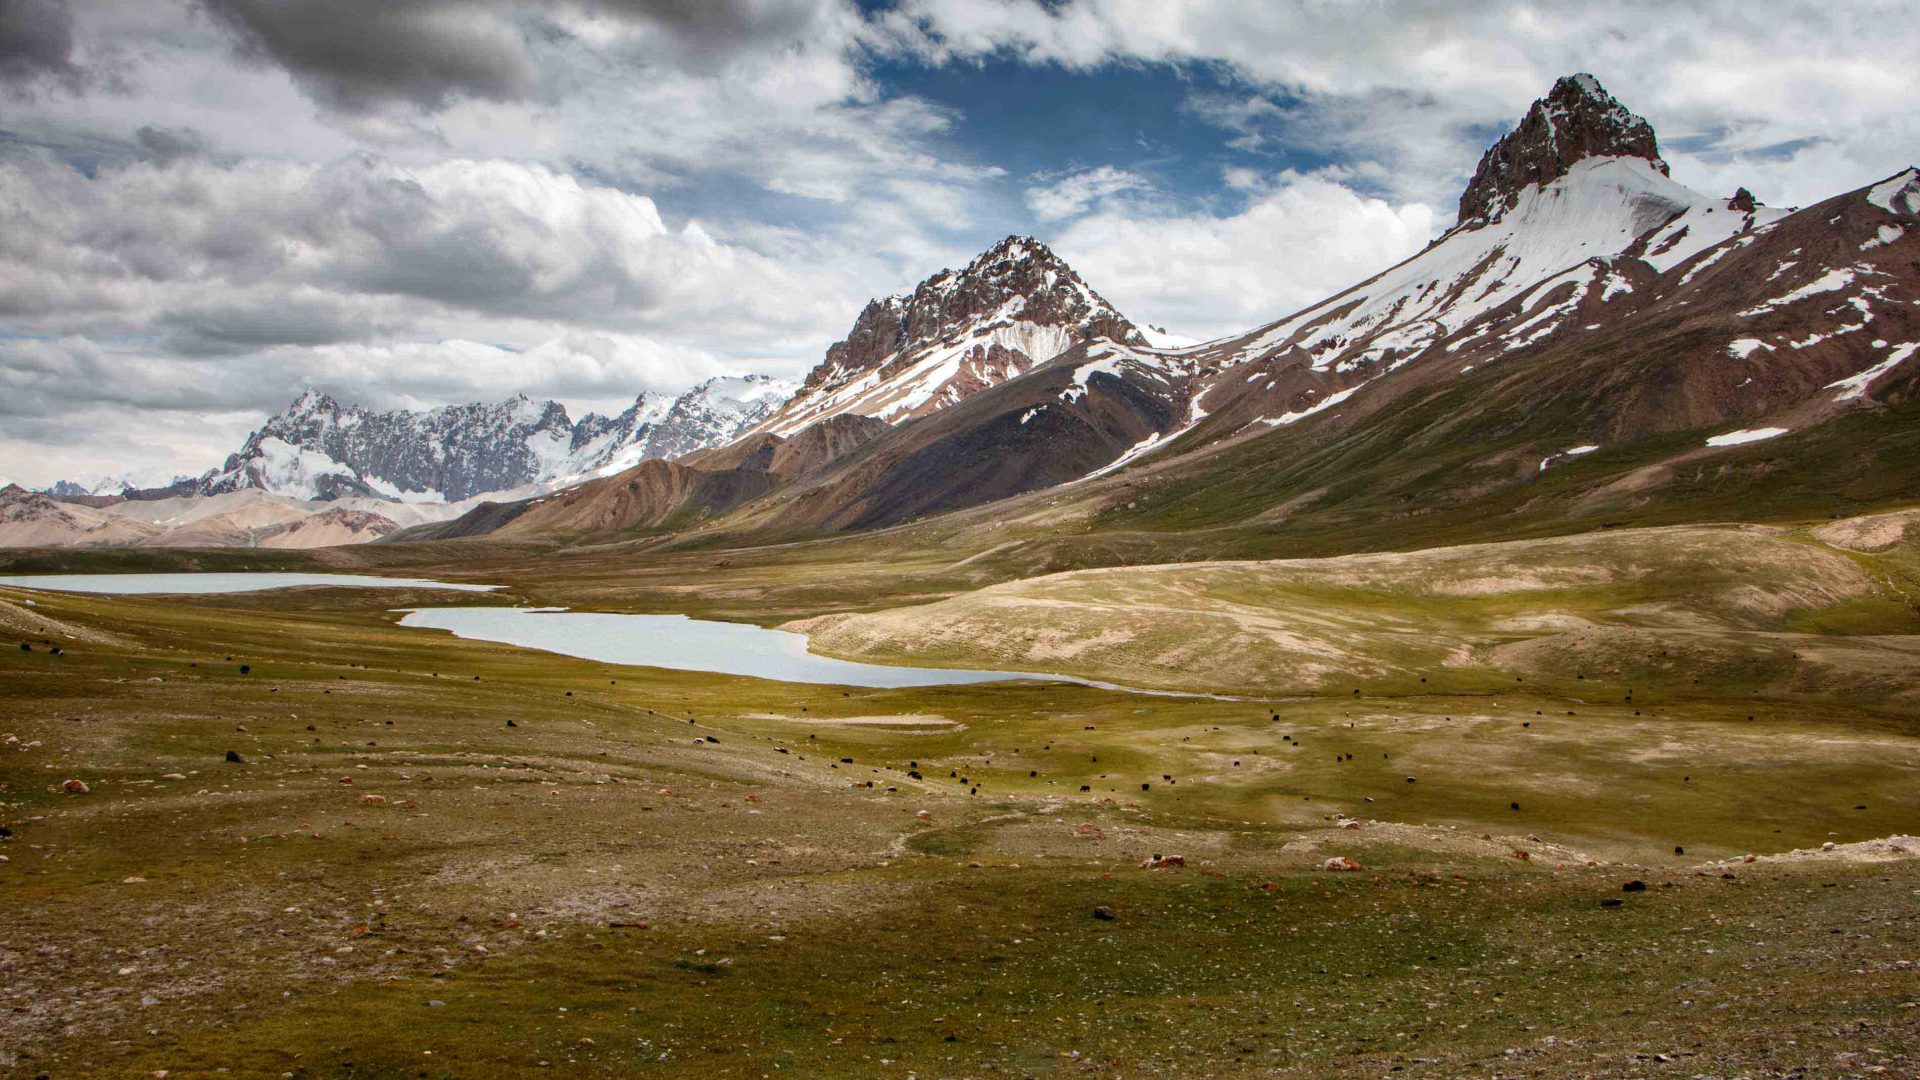 Below the 6,000-meter-high Karakoram mountains sits the Pamir plateau where yaks graze by high-altitude meadow and lakes.